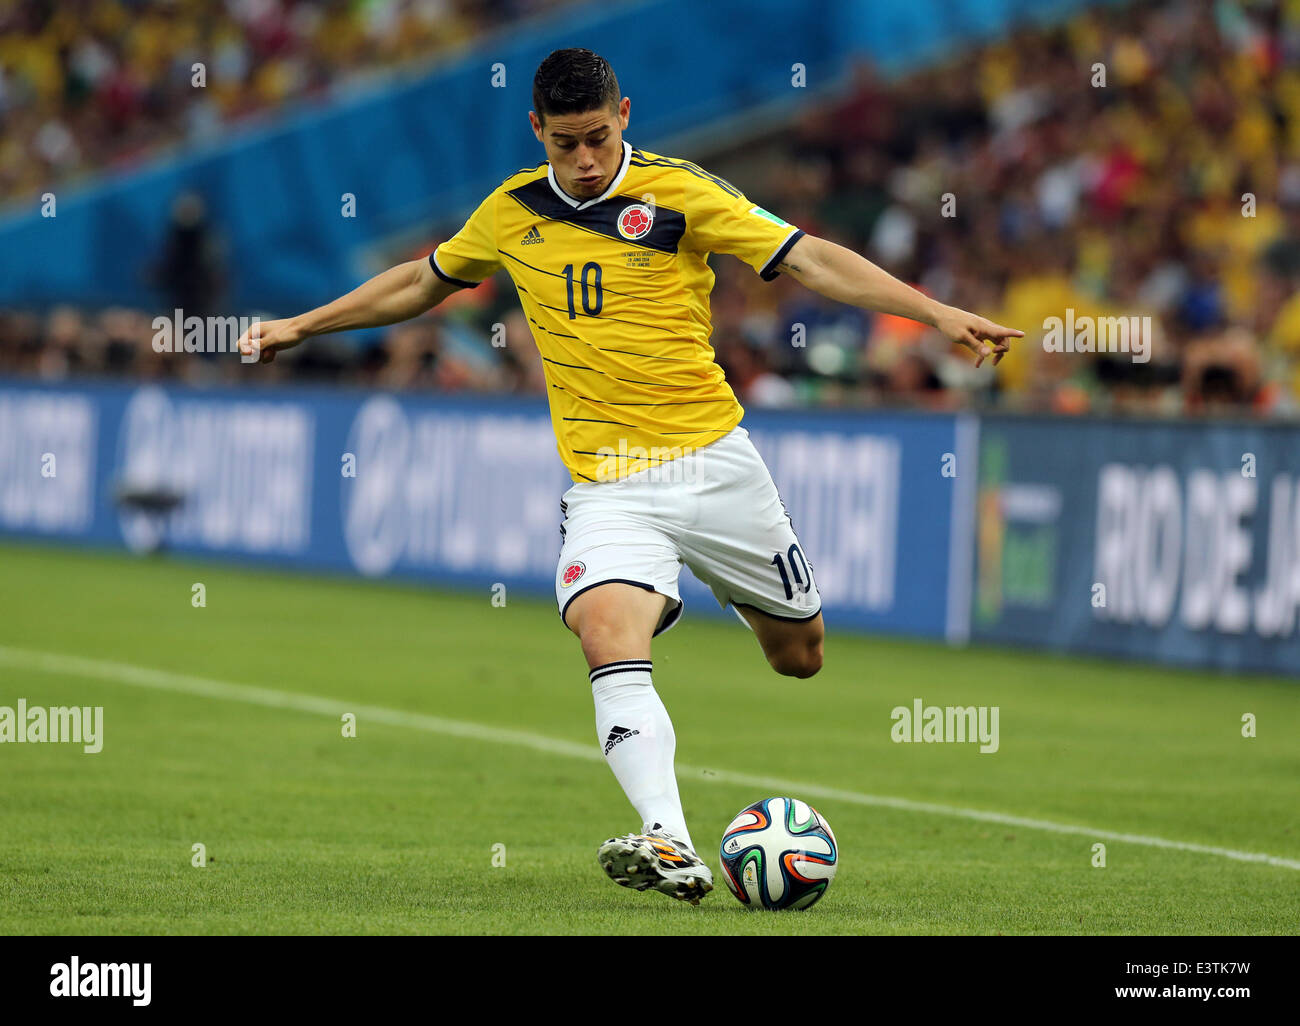 Rio De Janeiro, Brazil. 28th June, 2014. World Cup 2nd Round. Colombia versus Uruguay. James Rodriguez on the ball © Action Plus Sports/Alamy Live News Stock Photo